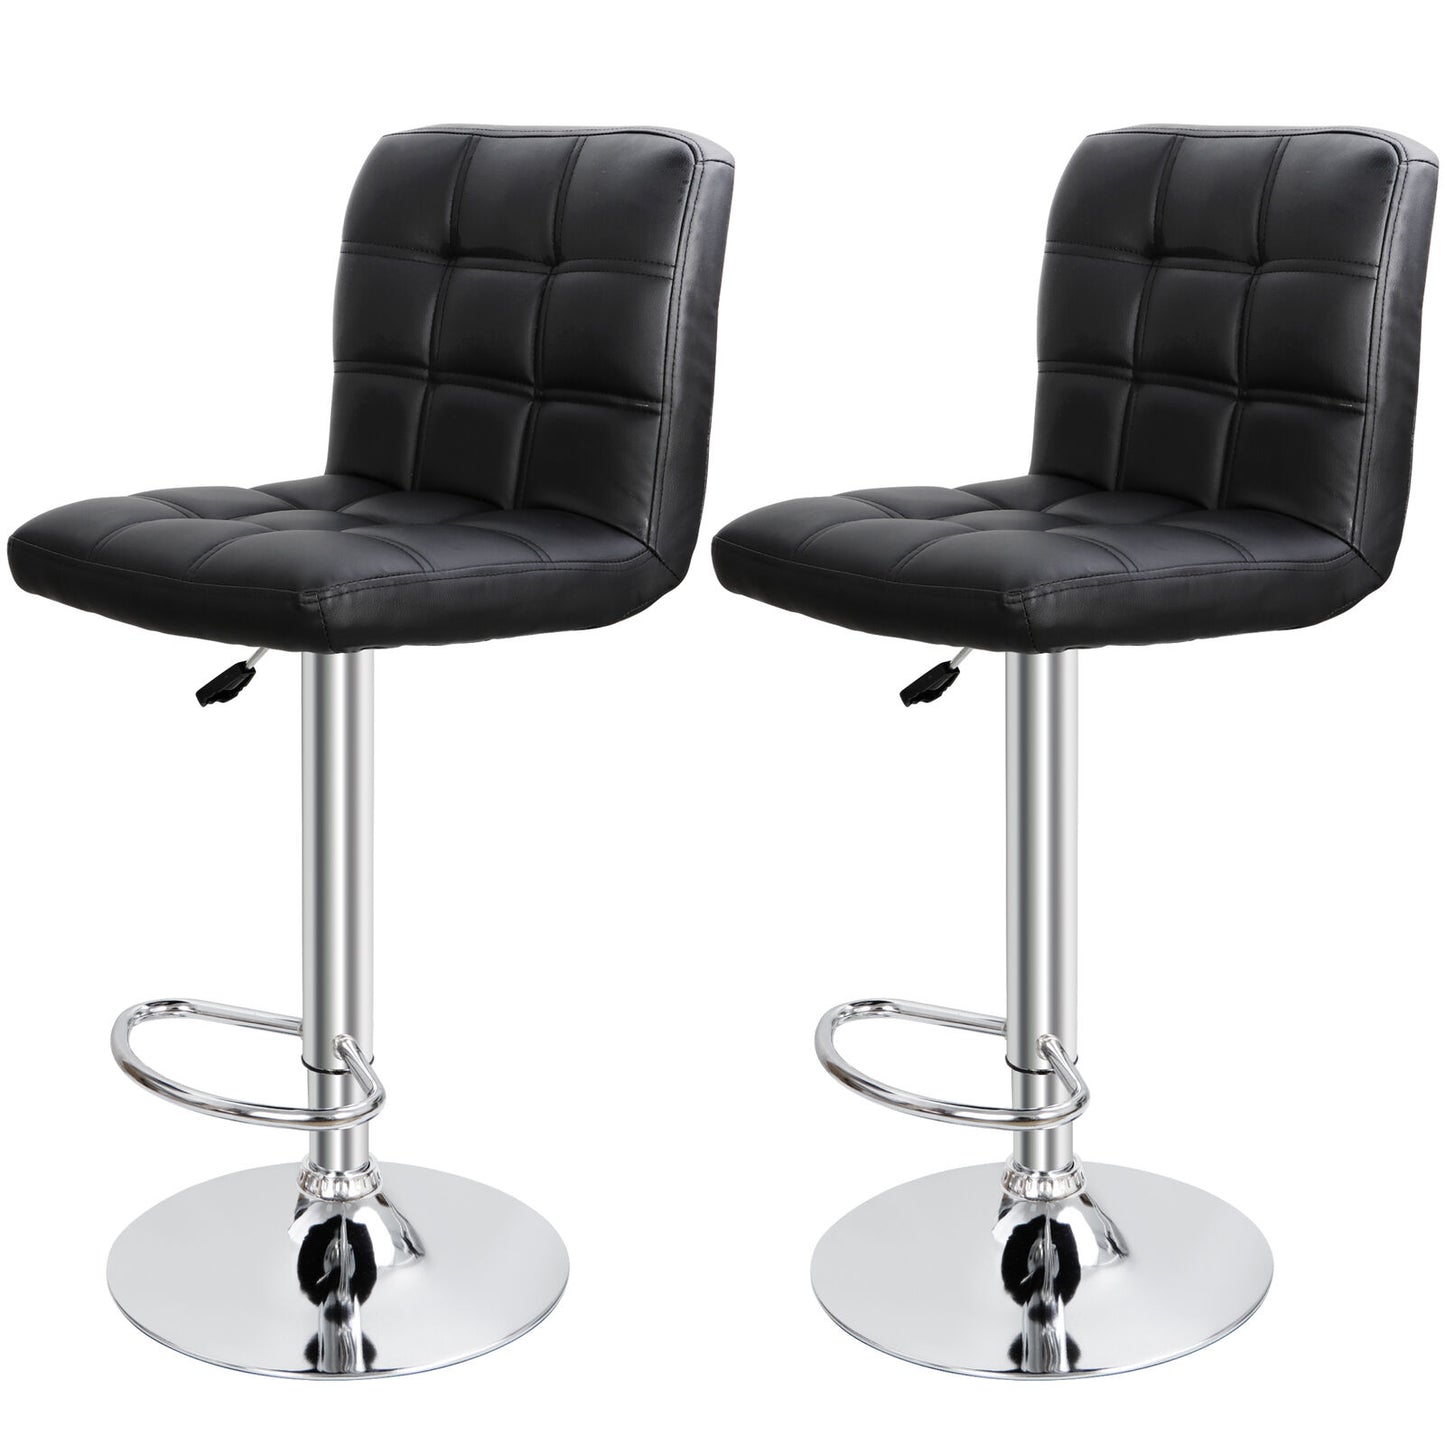 Set of 2 Adjustable Bar Stools PU Leather Modern Dinning Chair with Back